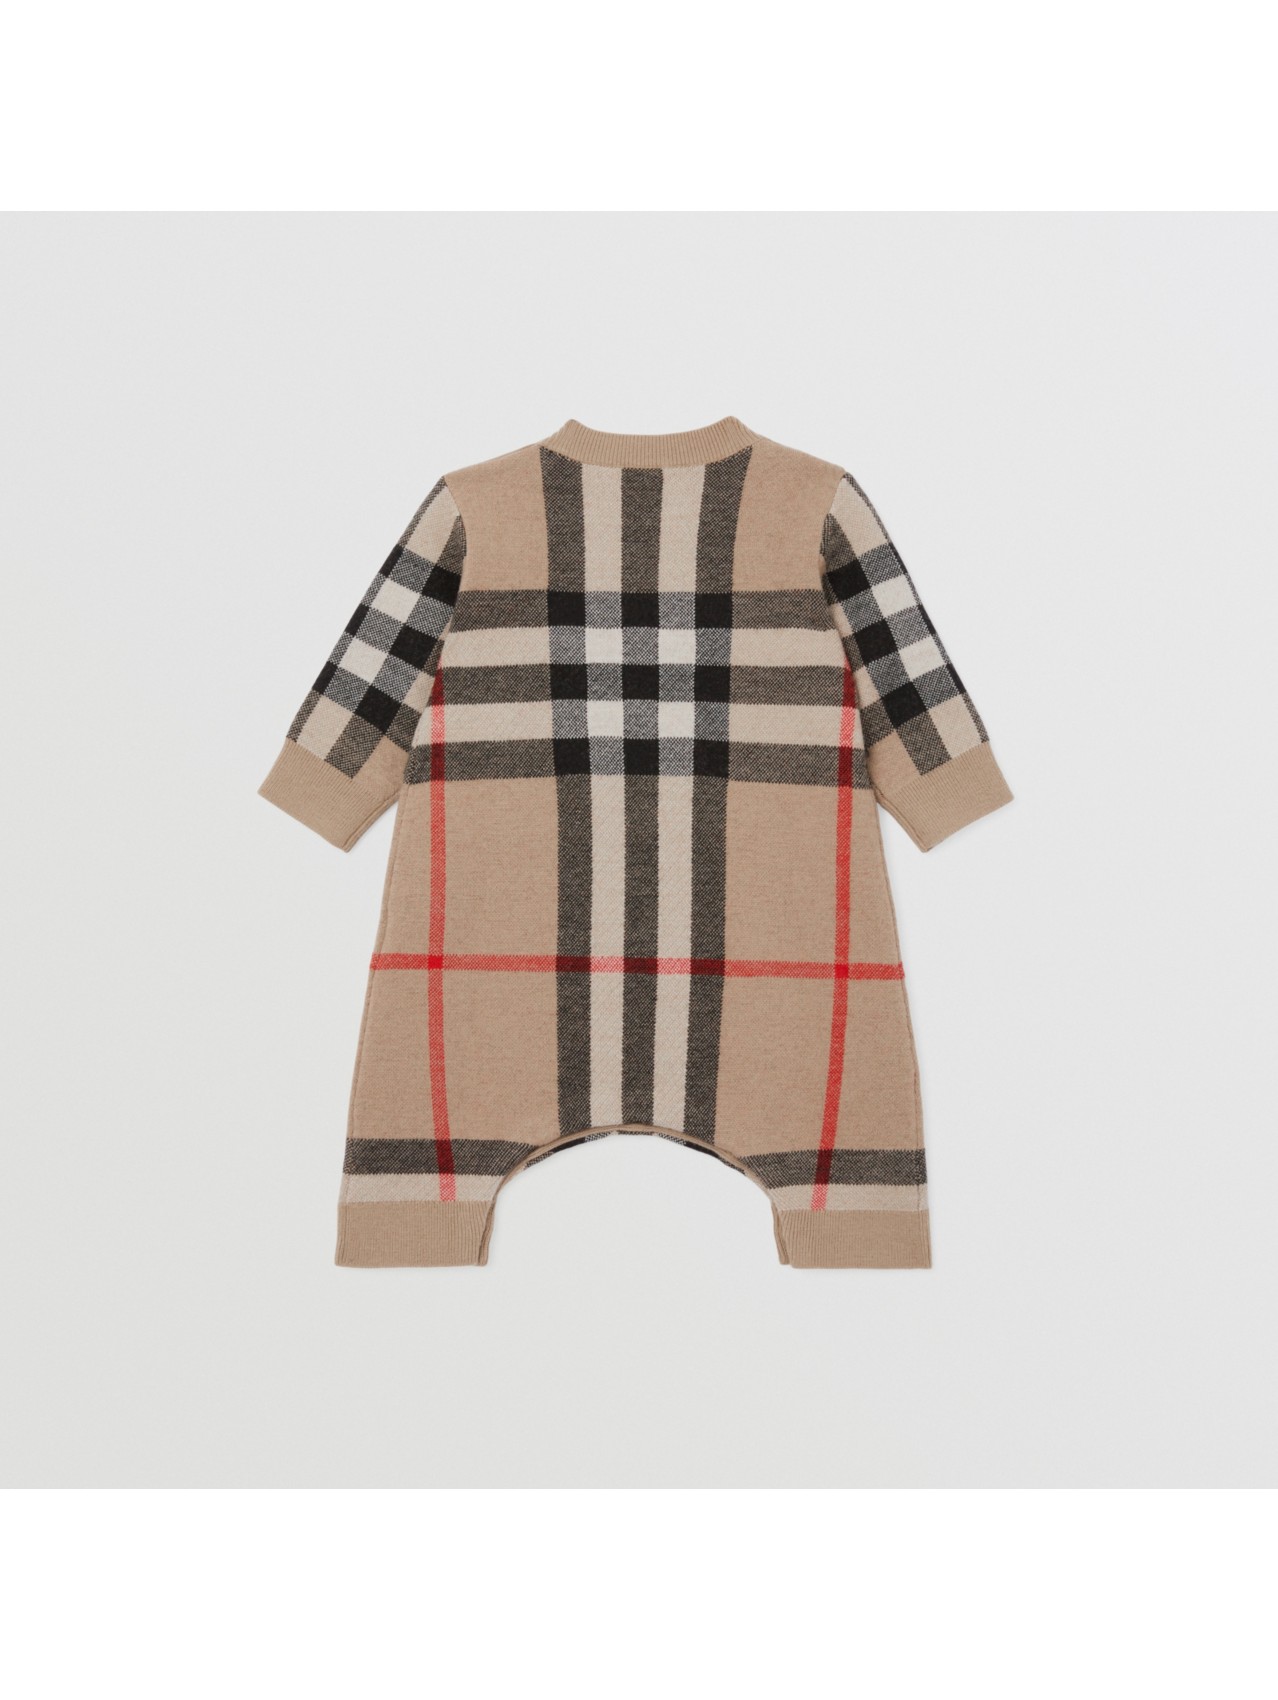 Baby Designer Clothing Burberry Baby Burberry® Official | vlr.eng.br